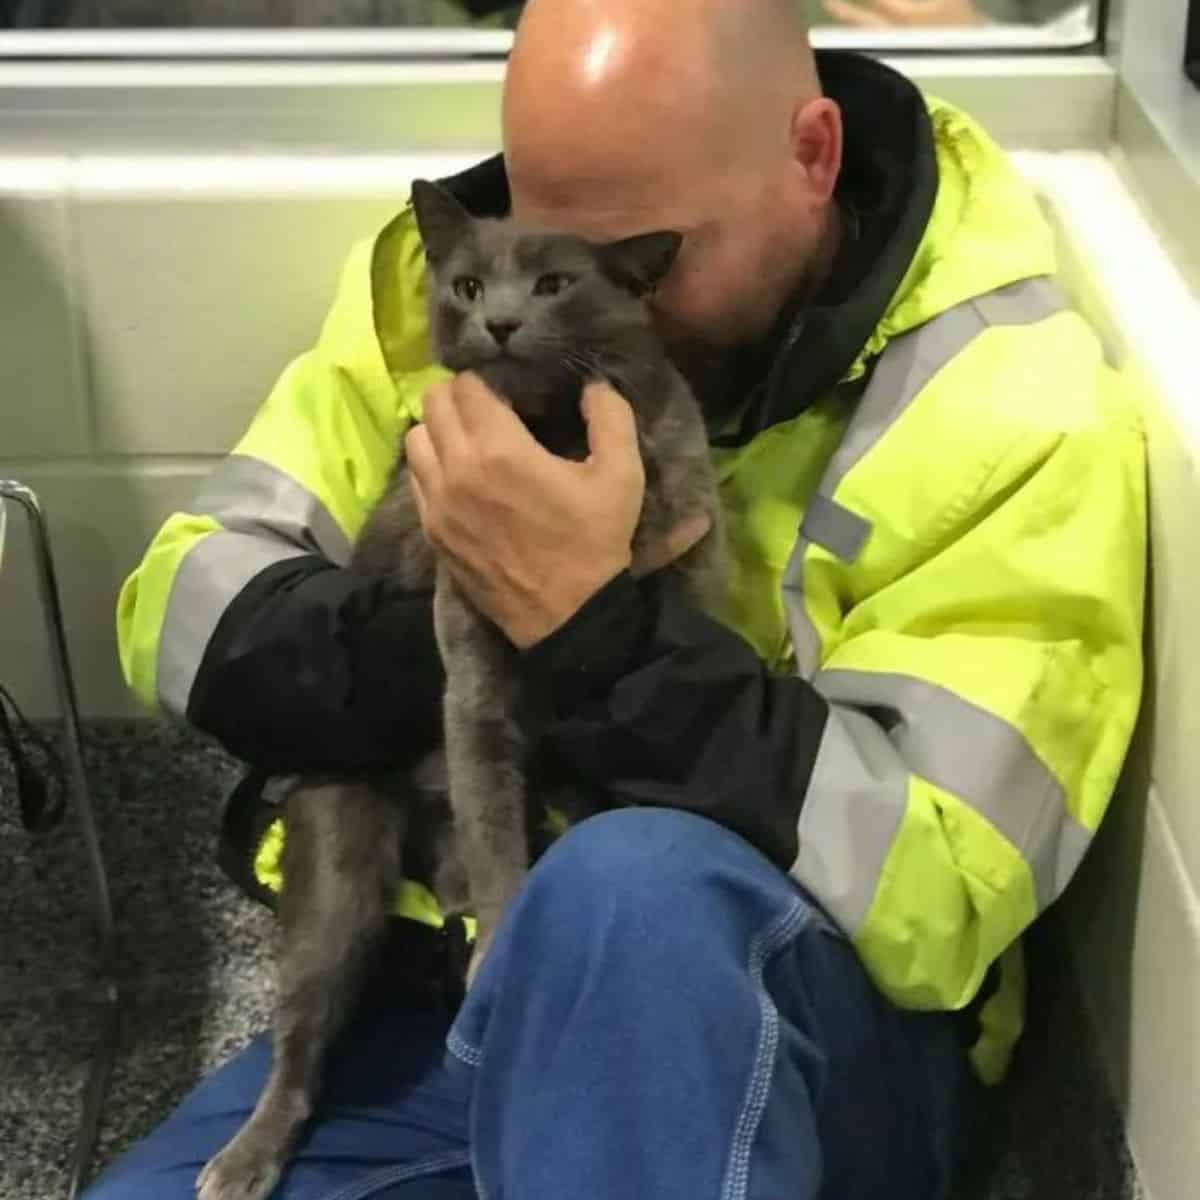 the driver hugs his cat after finding it